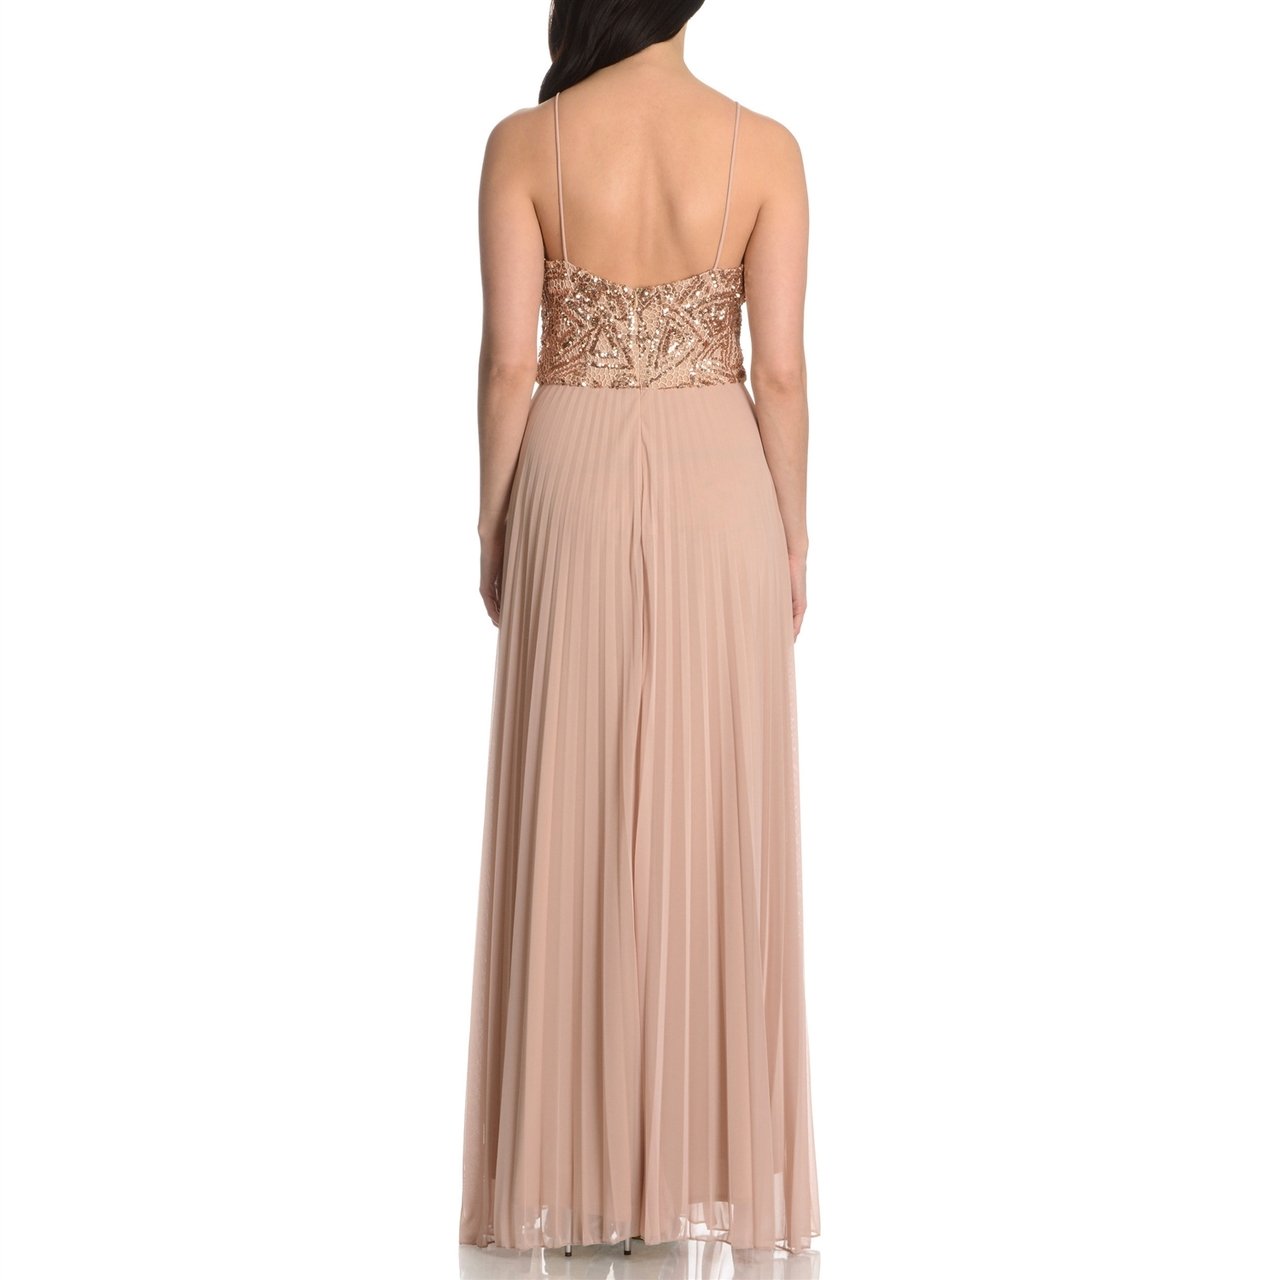 Cachet - 56902 Halter Sequin Pleated Chiffon Dress in Neutral